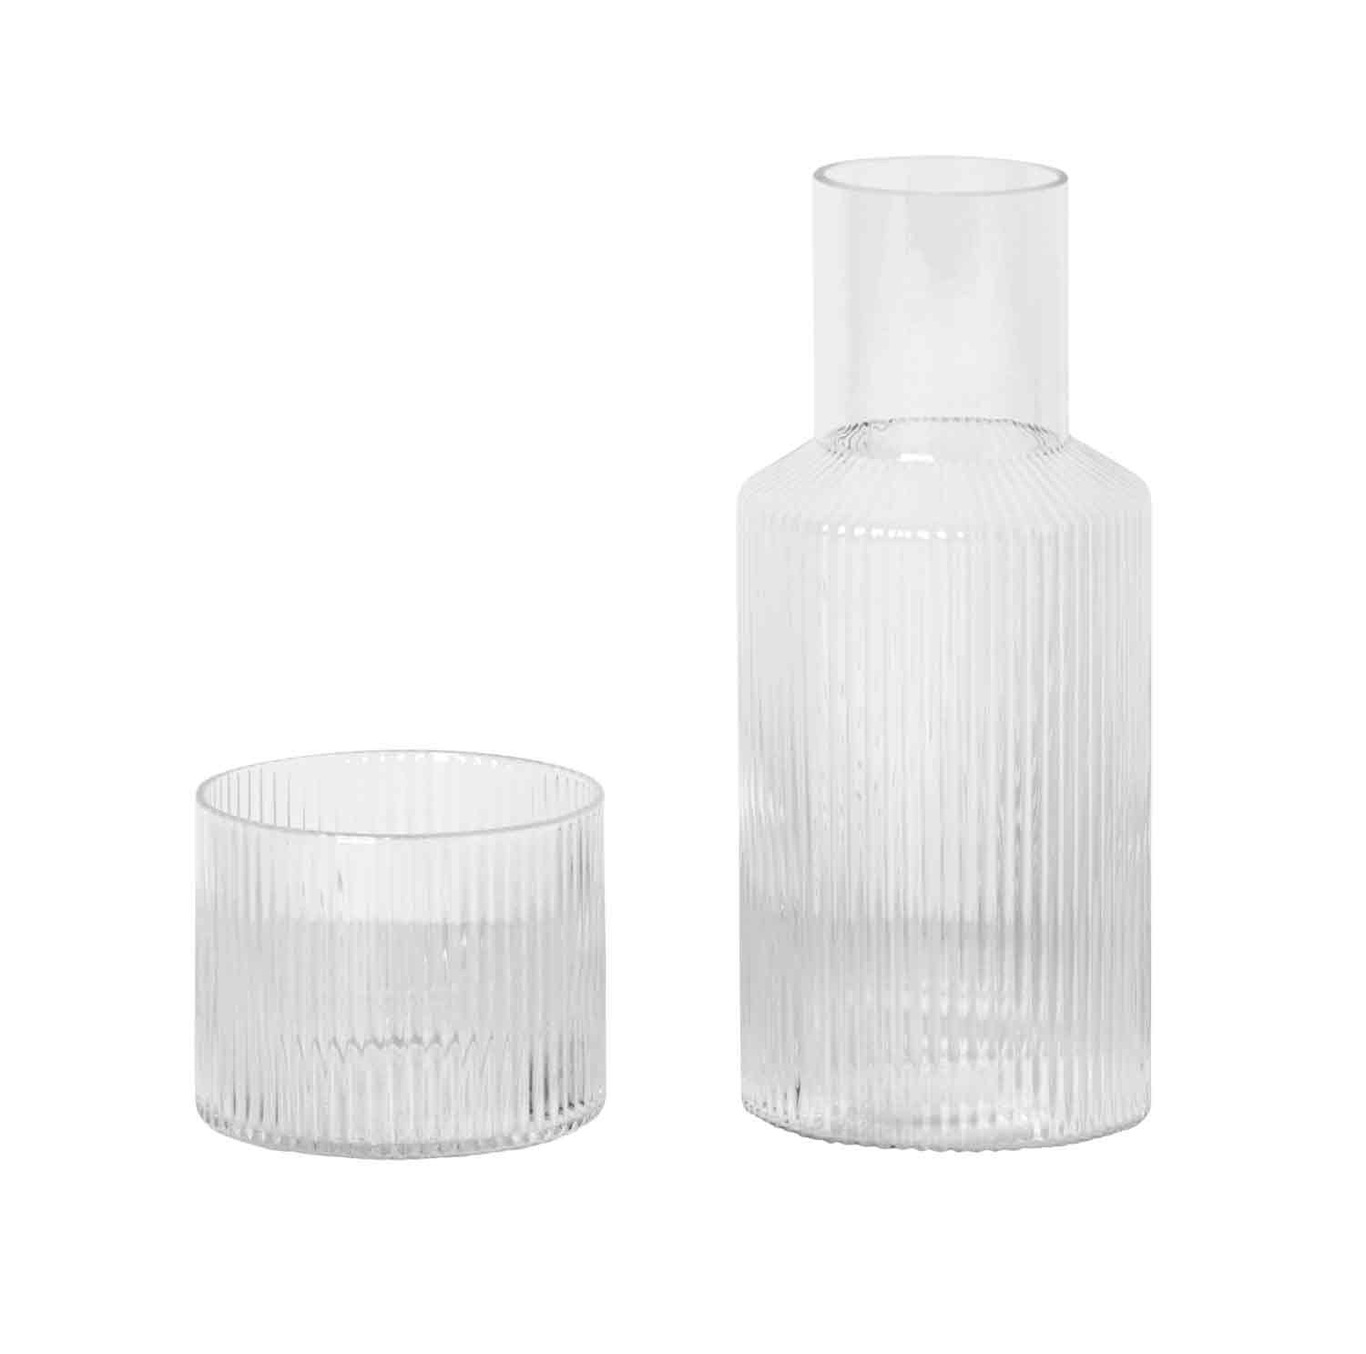 Ripple Small Carafe Set Carafe With Drinking Glass, Clear